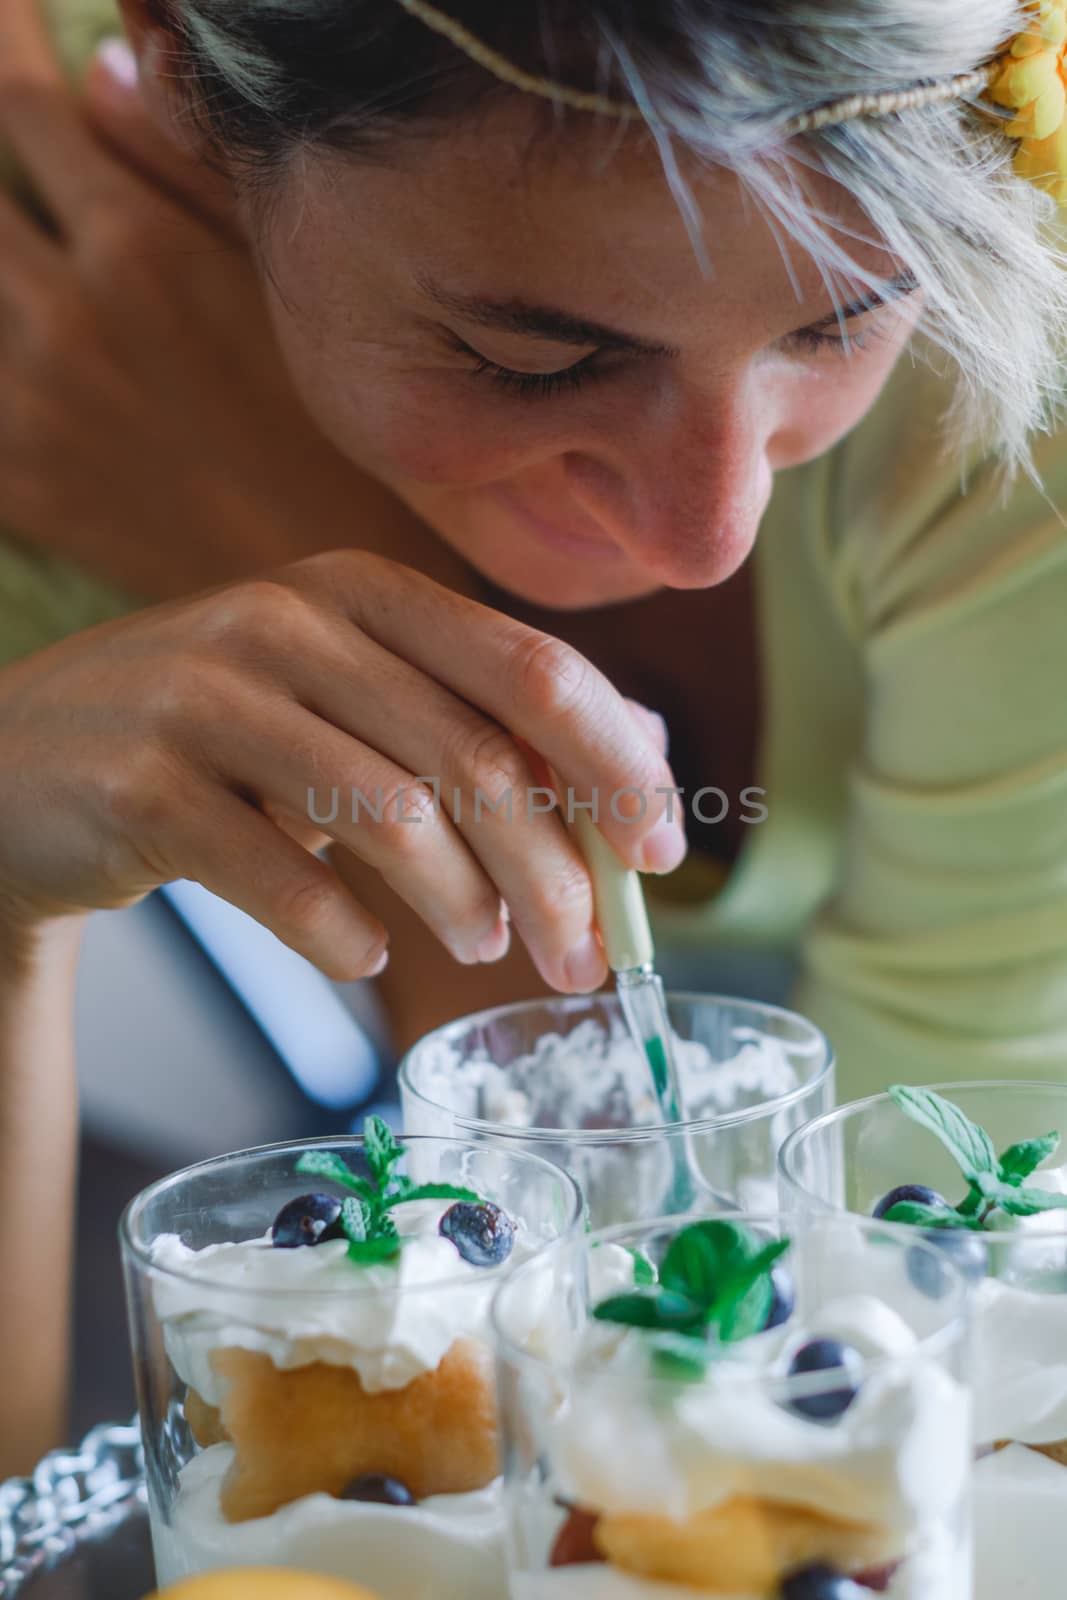 Close-up image of young lady eating dessert.